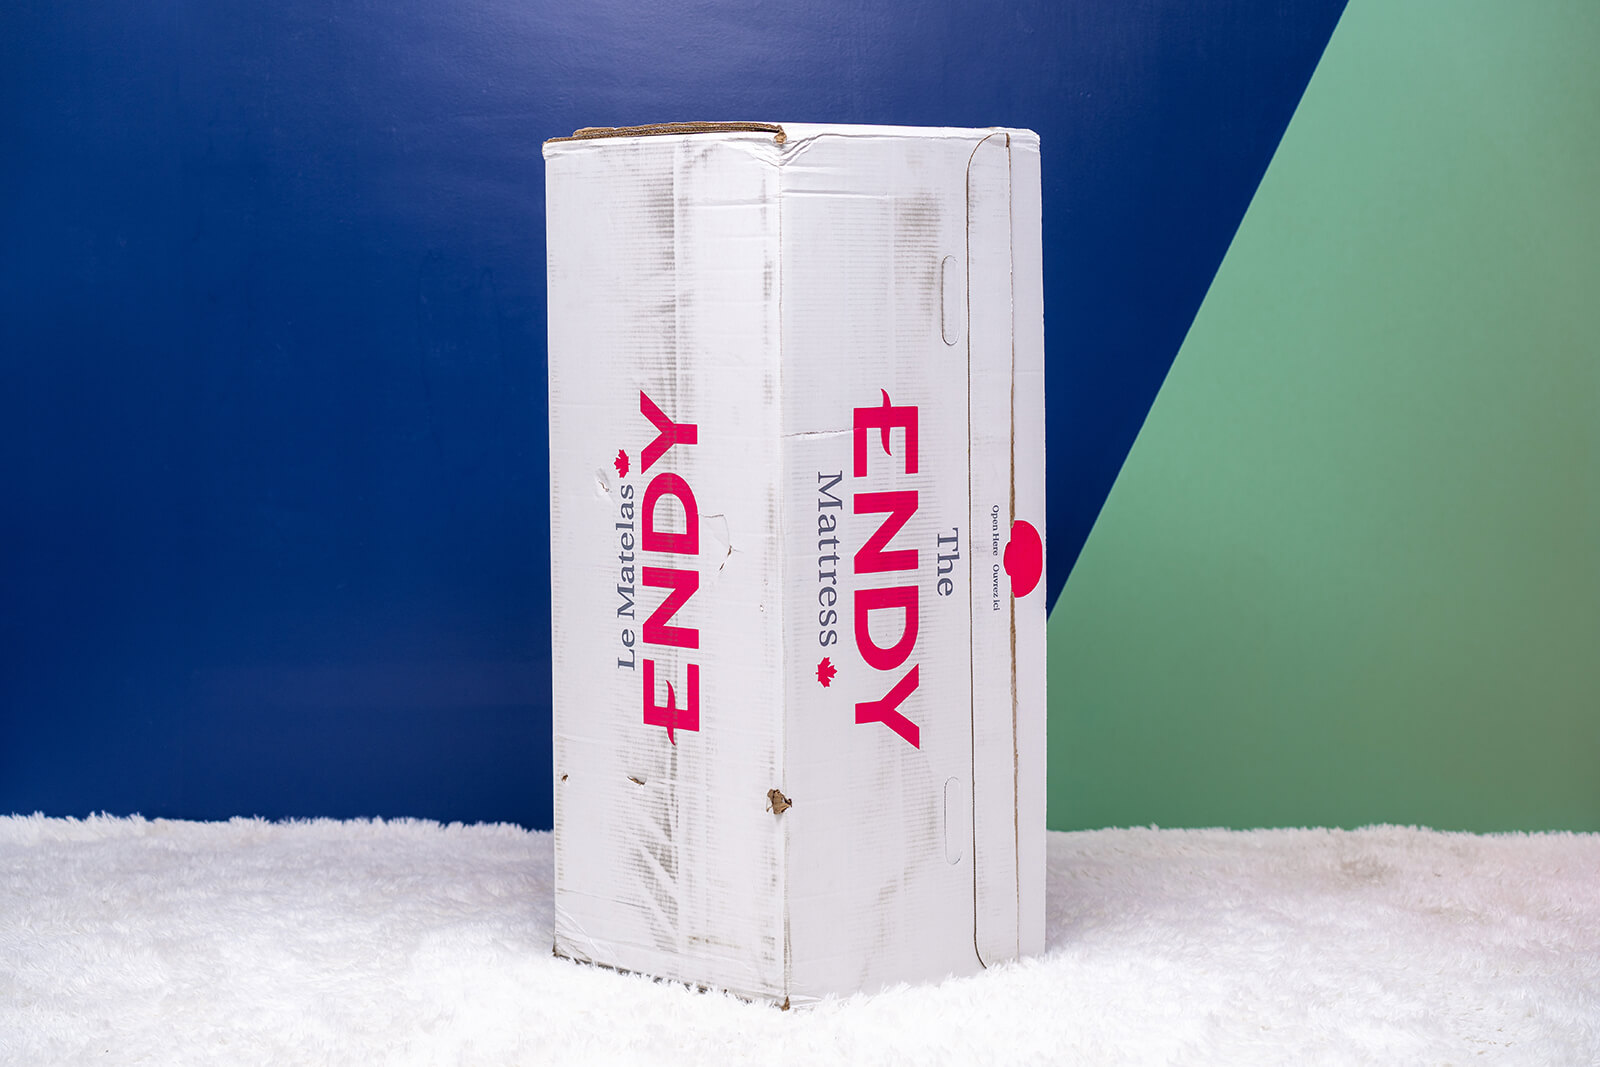 Photo of the Endy Mattress box on the floor in a bedroom taken from a front angle.